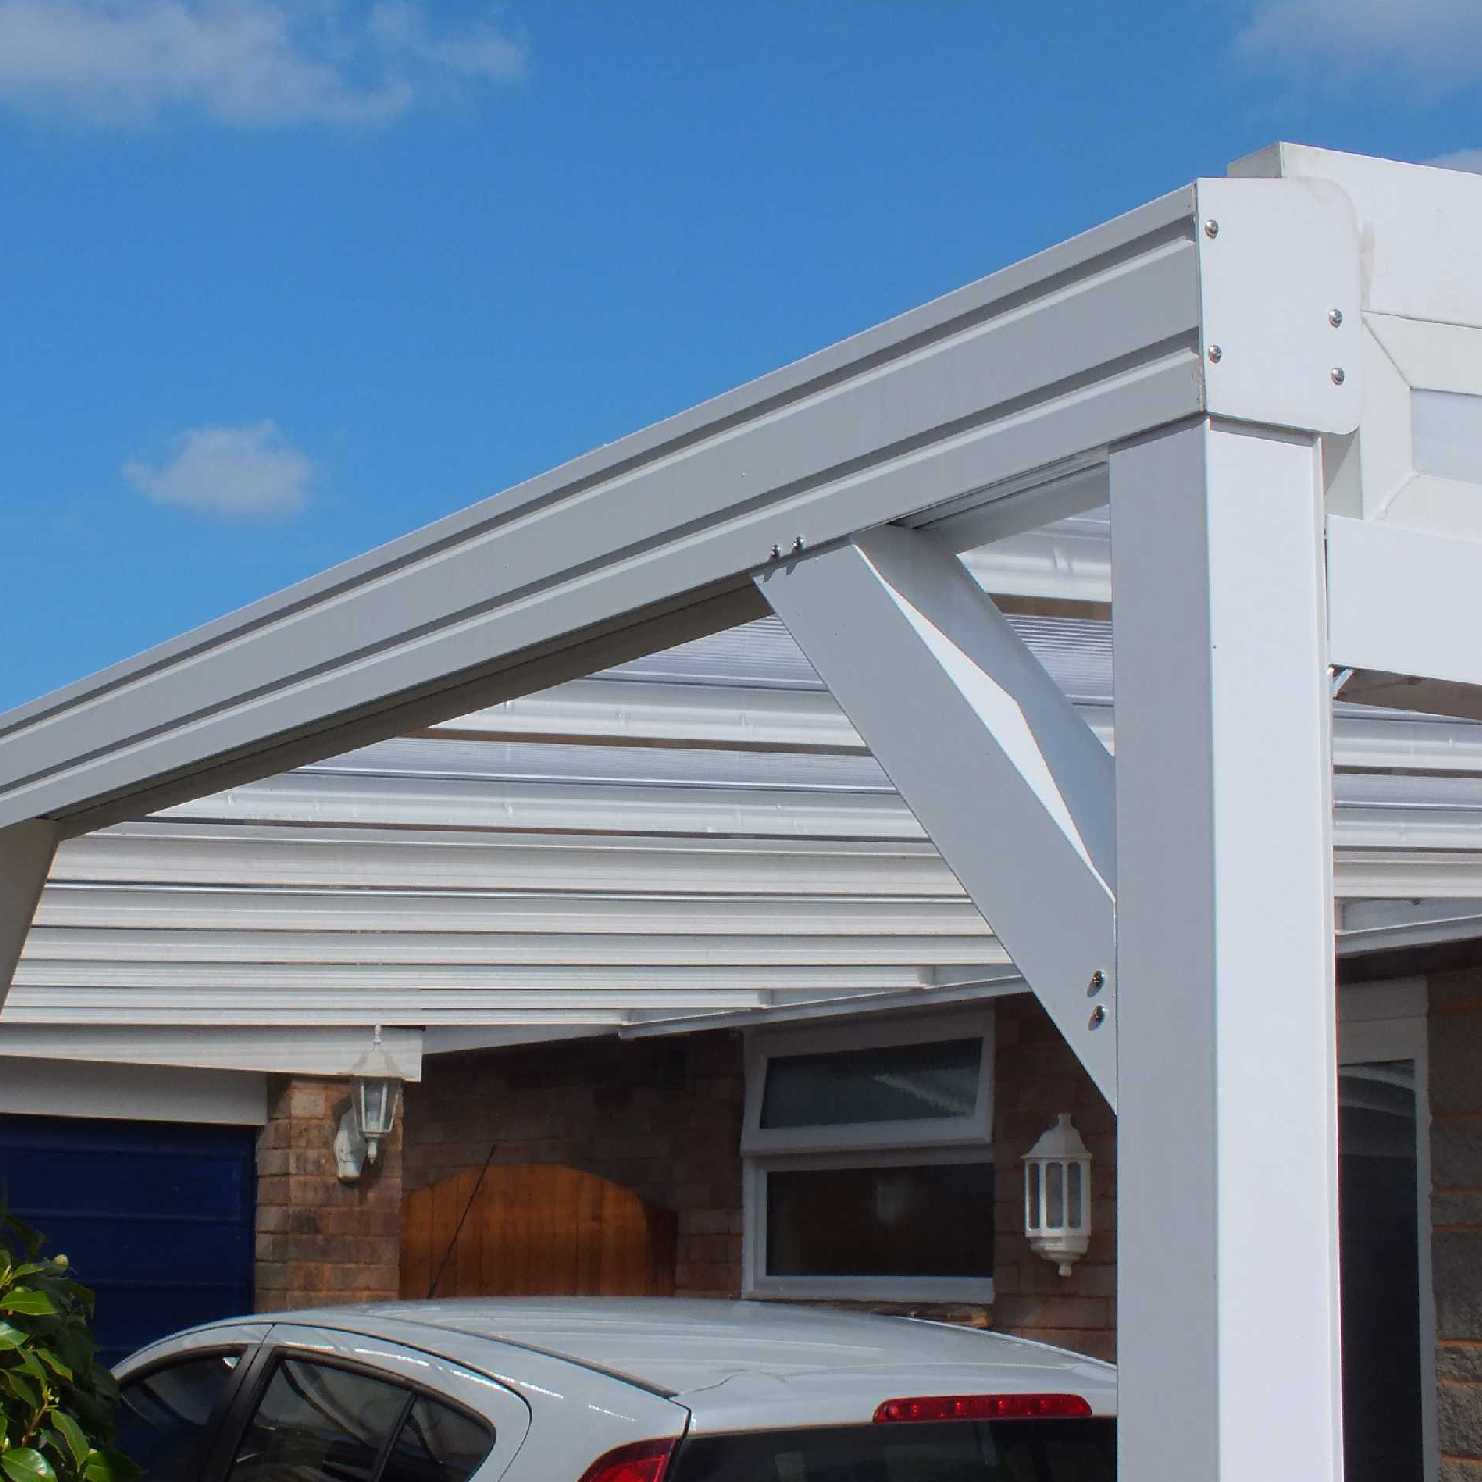 Buy Omega Smart Lean-To Canopy, White with 16mm Polycarbonate Glazing - 10.2m (W) x 4.5m (P), (5) Supporting Posts online today